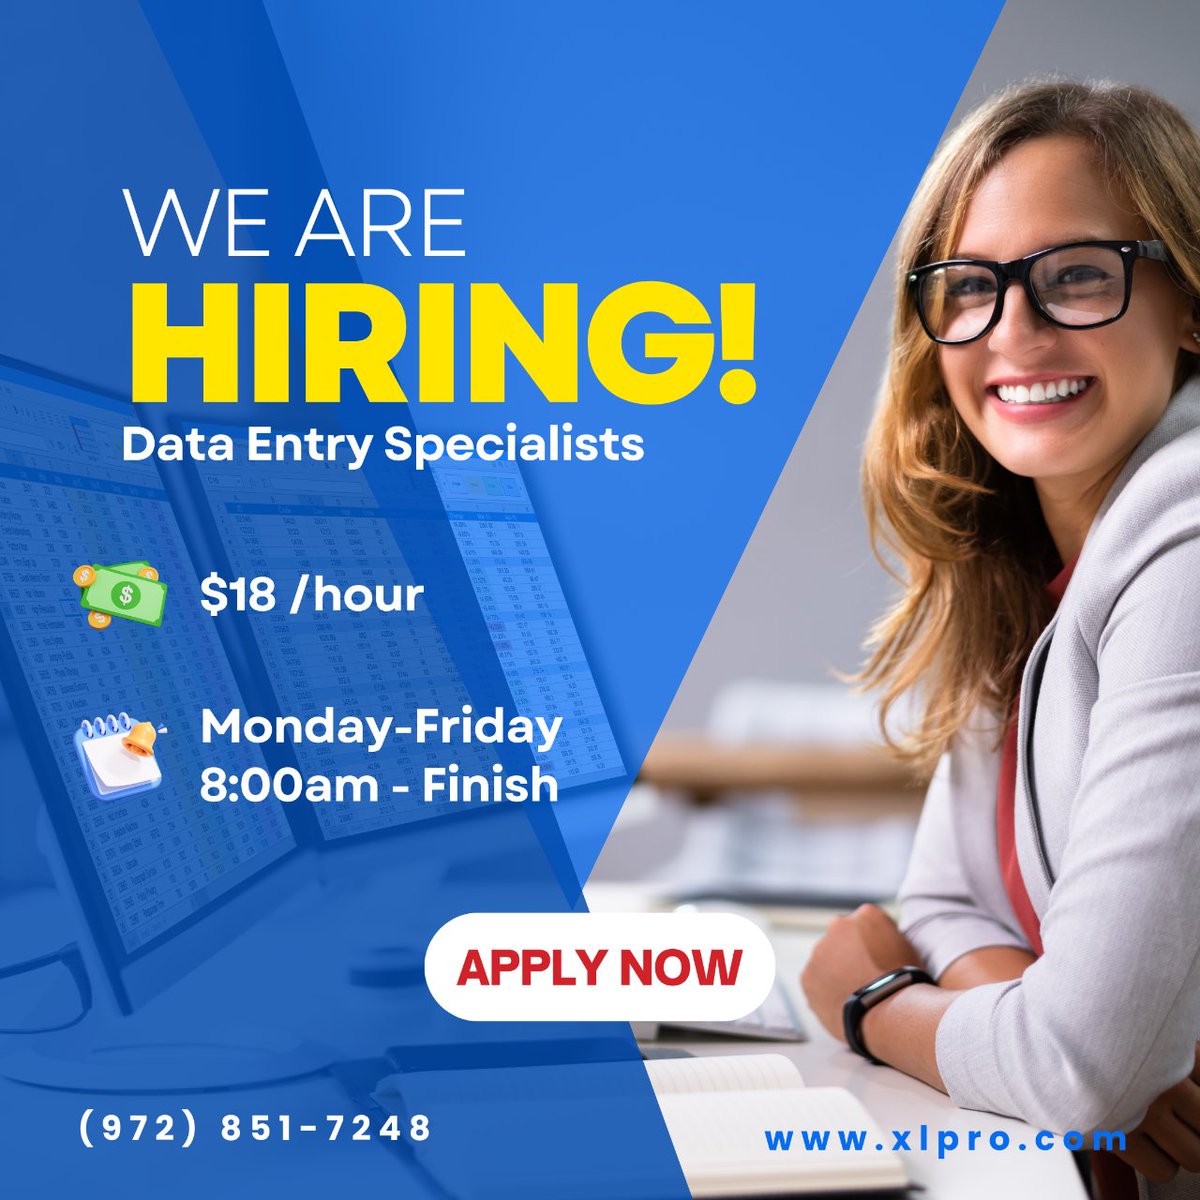 📣 #NowHiring #DataEntry Specialists in #GarlandTX! ⬇️

Want to apply? 🤩

👉 Go to our website’s Job Board or call our office for more details about this or other jobs we have available.

📞 (972) 851-7248 

#xlpro #staffing #staffingentagency